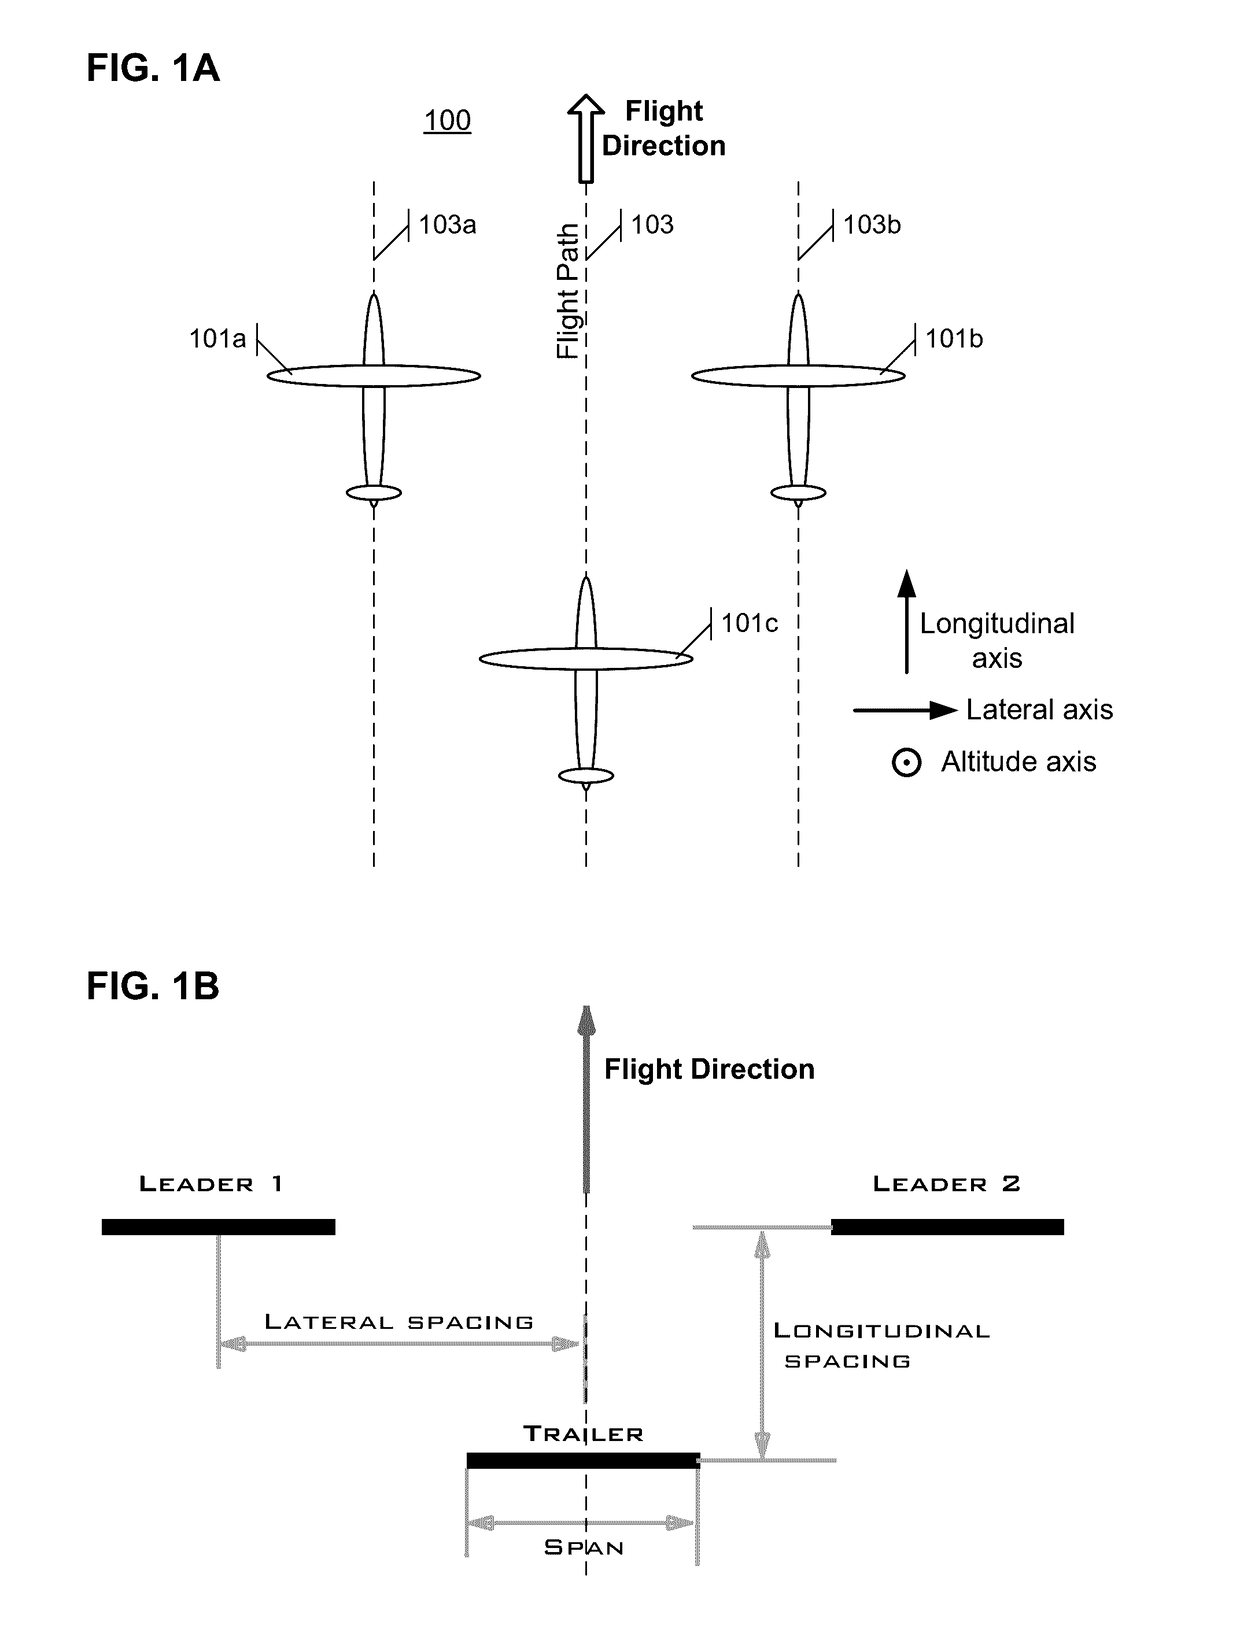 Automated operation of aircraft systems in inverted-v formations